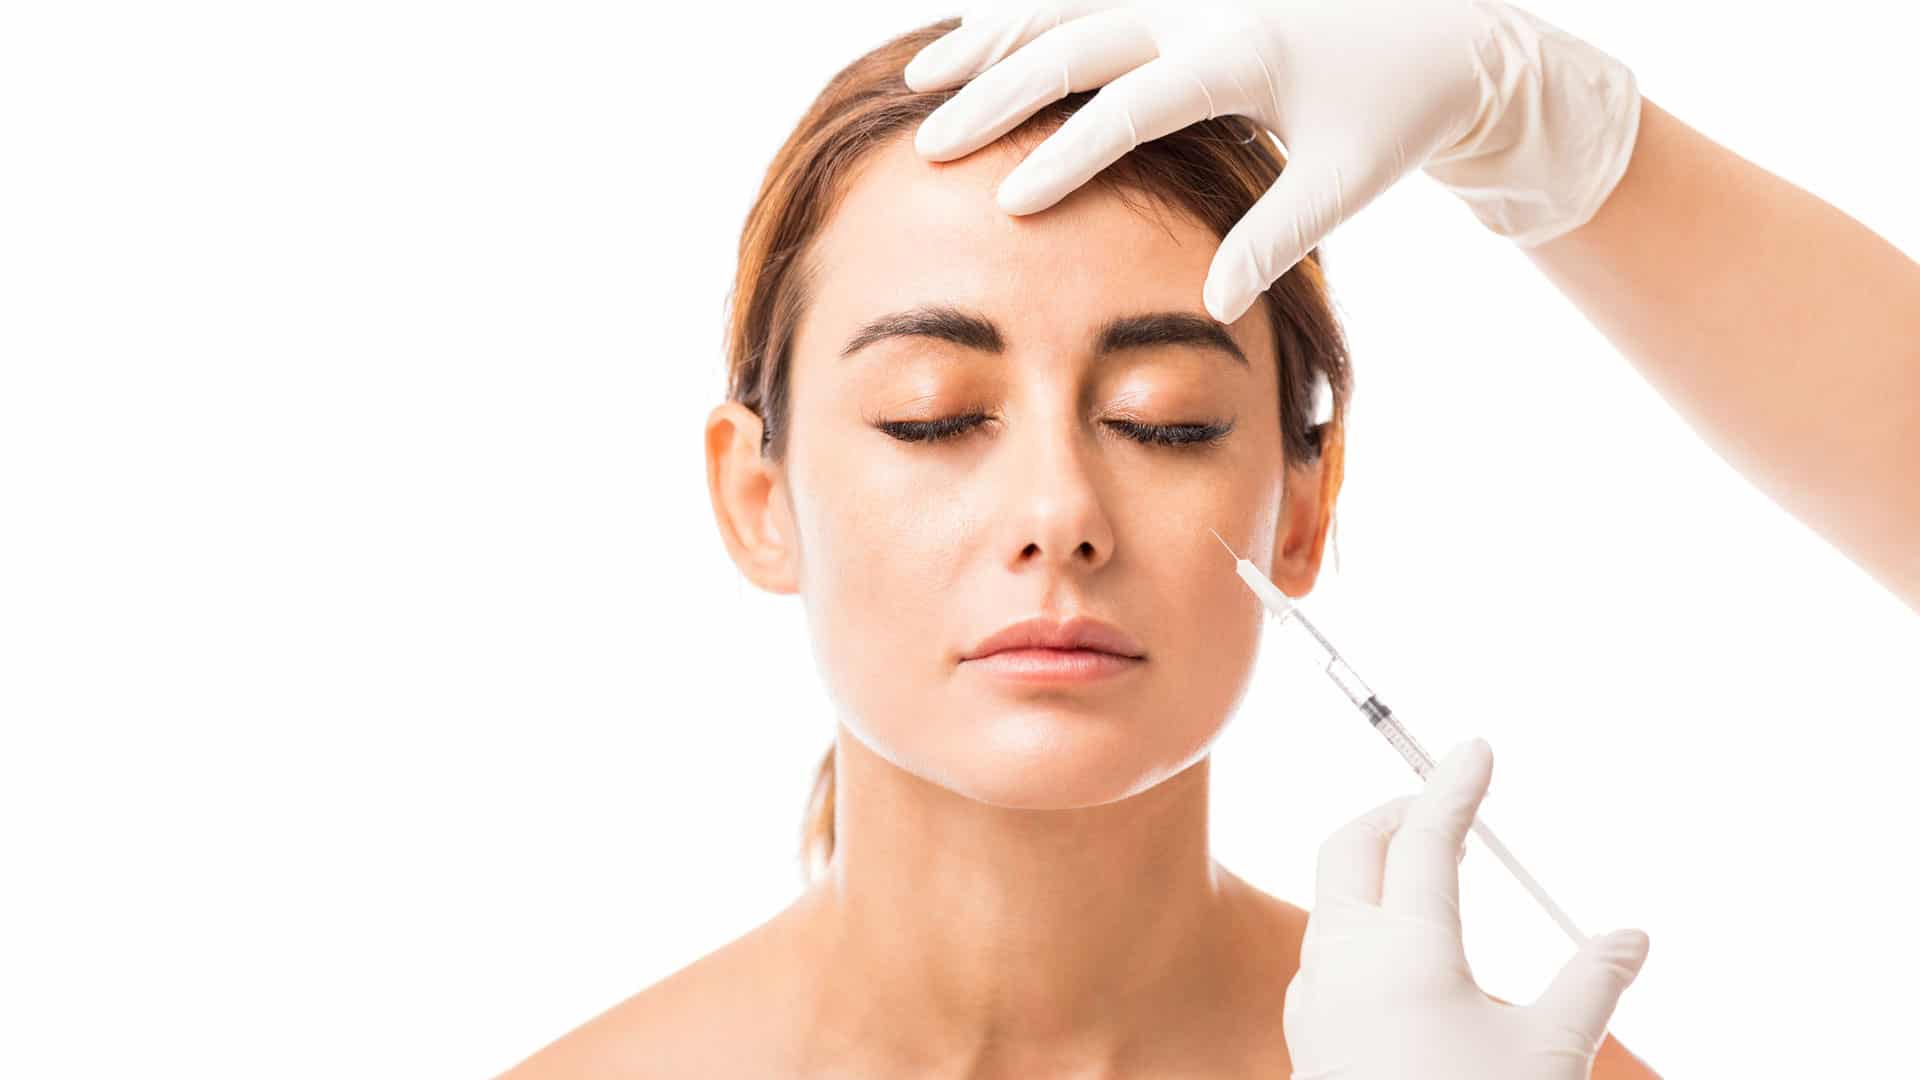 Best Botox Treatment in Mumbai at Affordable Price Cost India by Dr Debraj Shome at The Esthetic Clinics